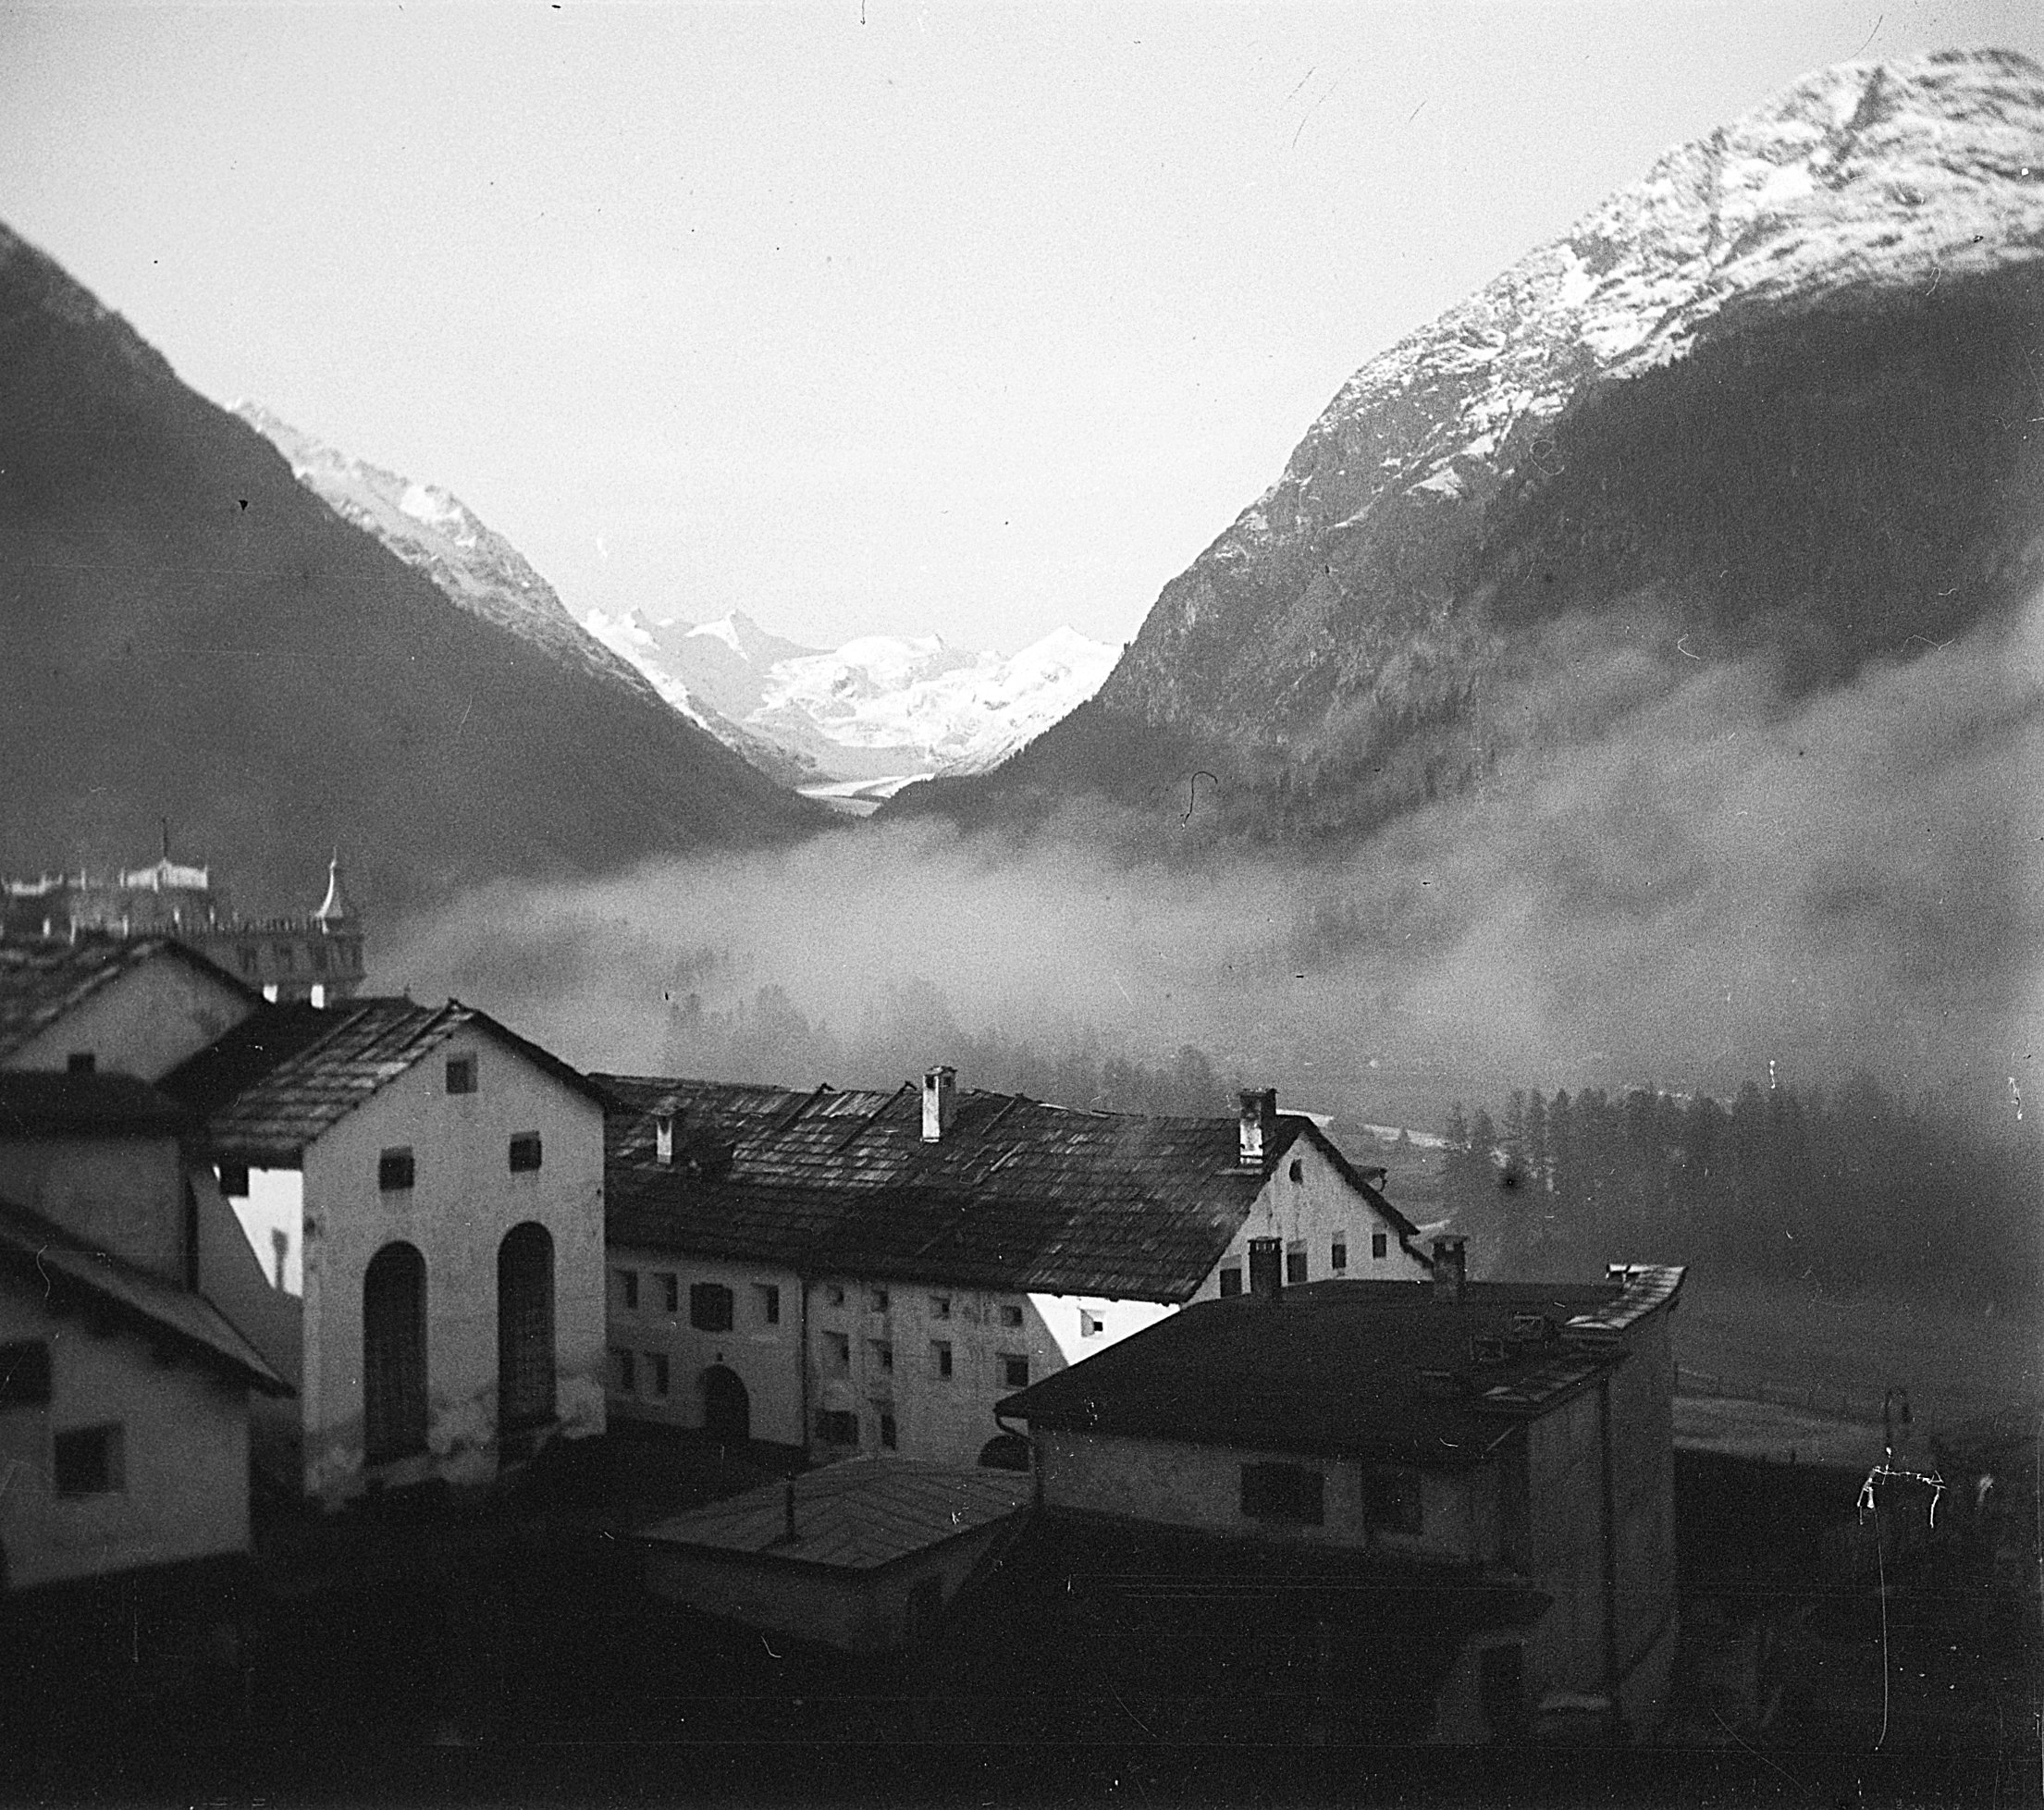 Aussicht vom Dach des Hotels Weisses Kreuz in Pontresina (Sommer 1902), 87238 sn R_o (DRM CC BY-NC-SA)